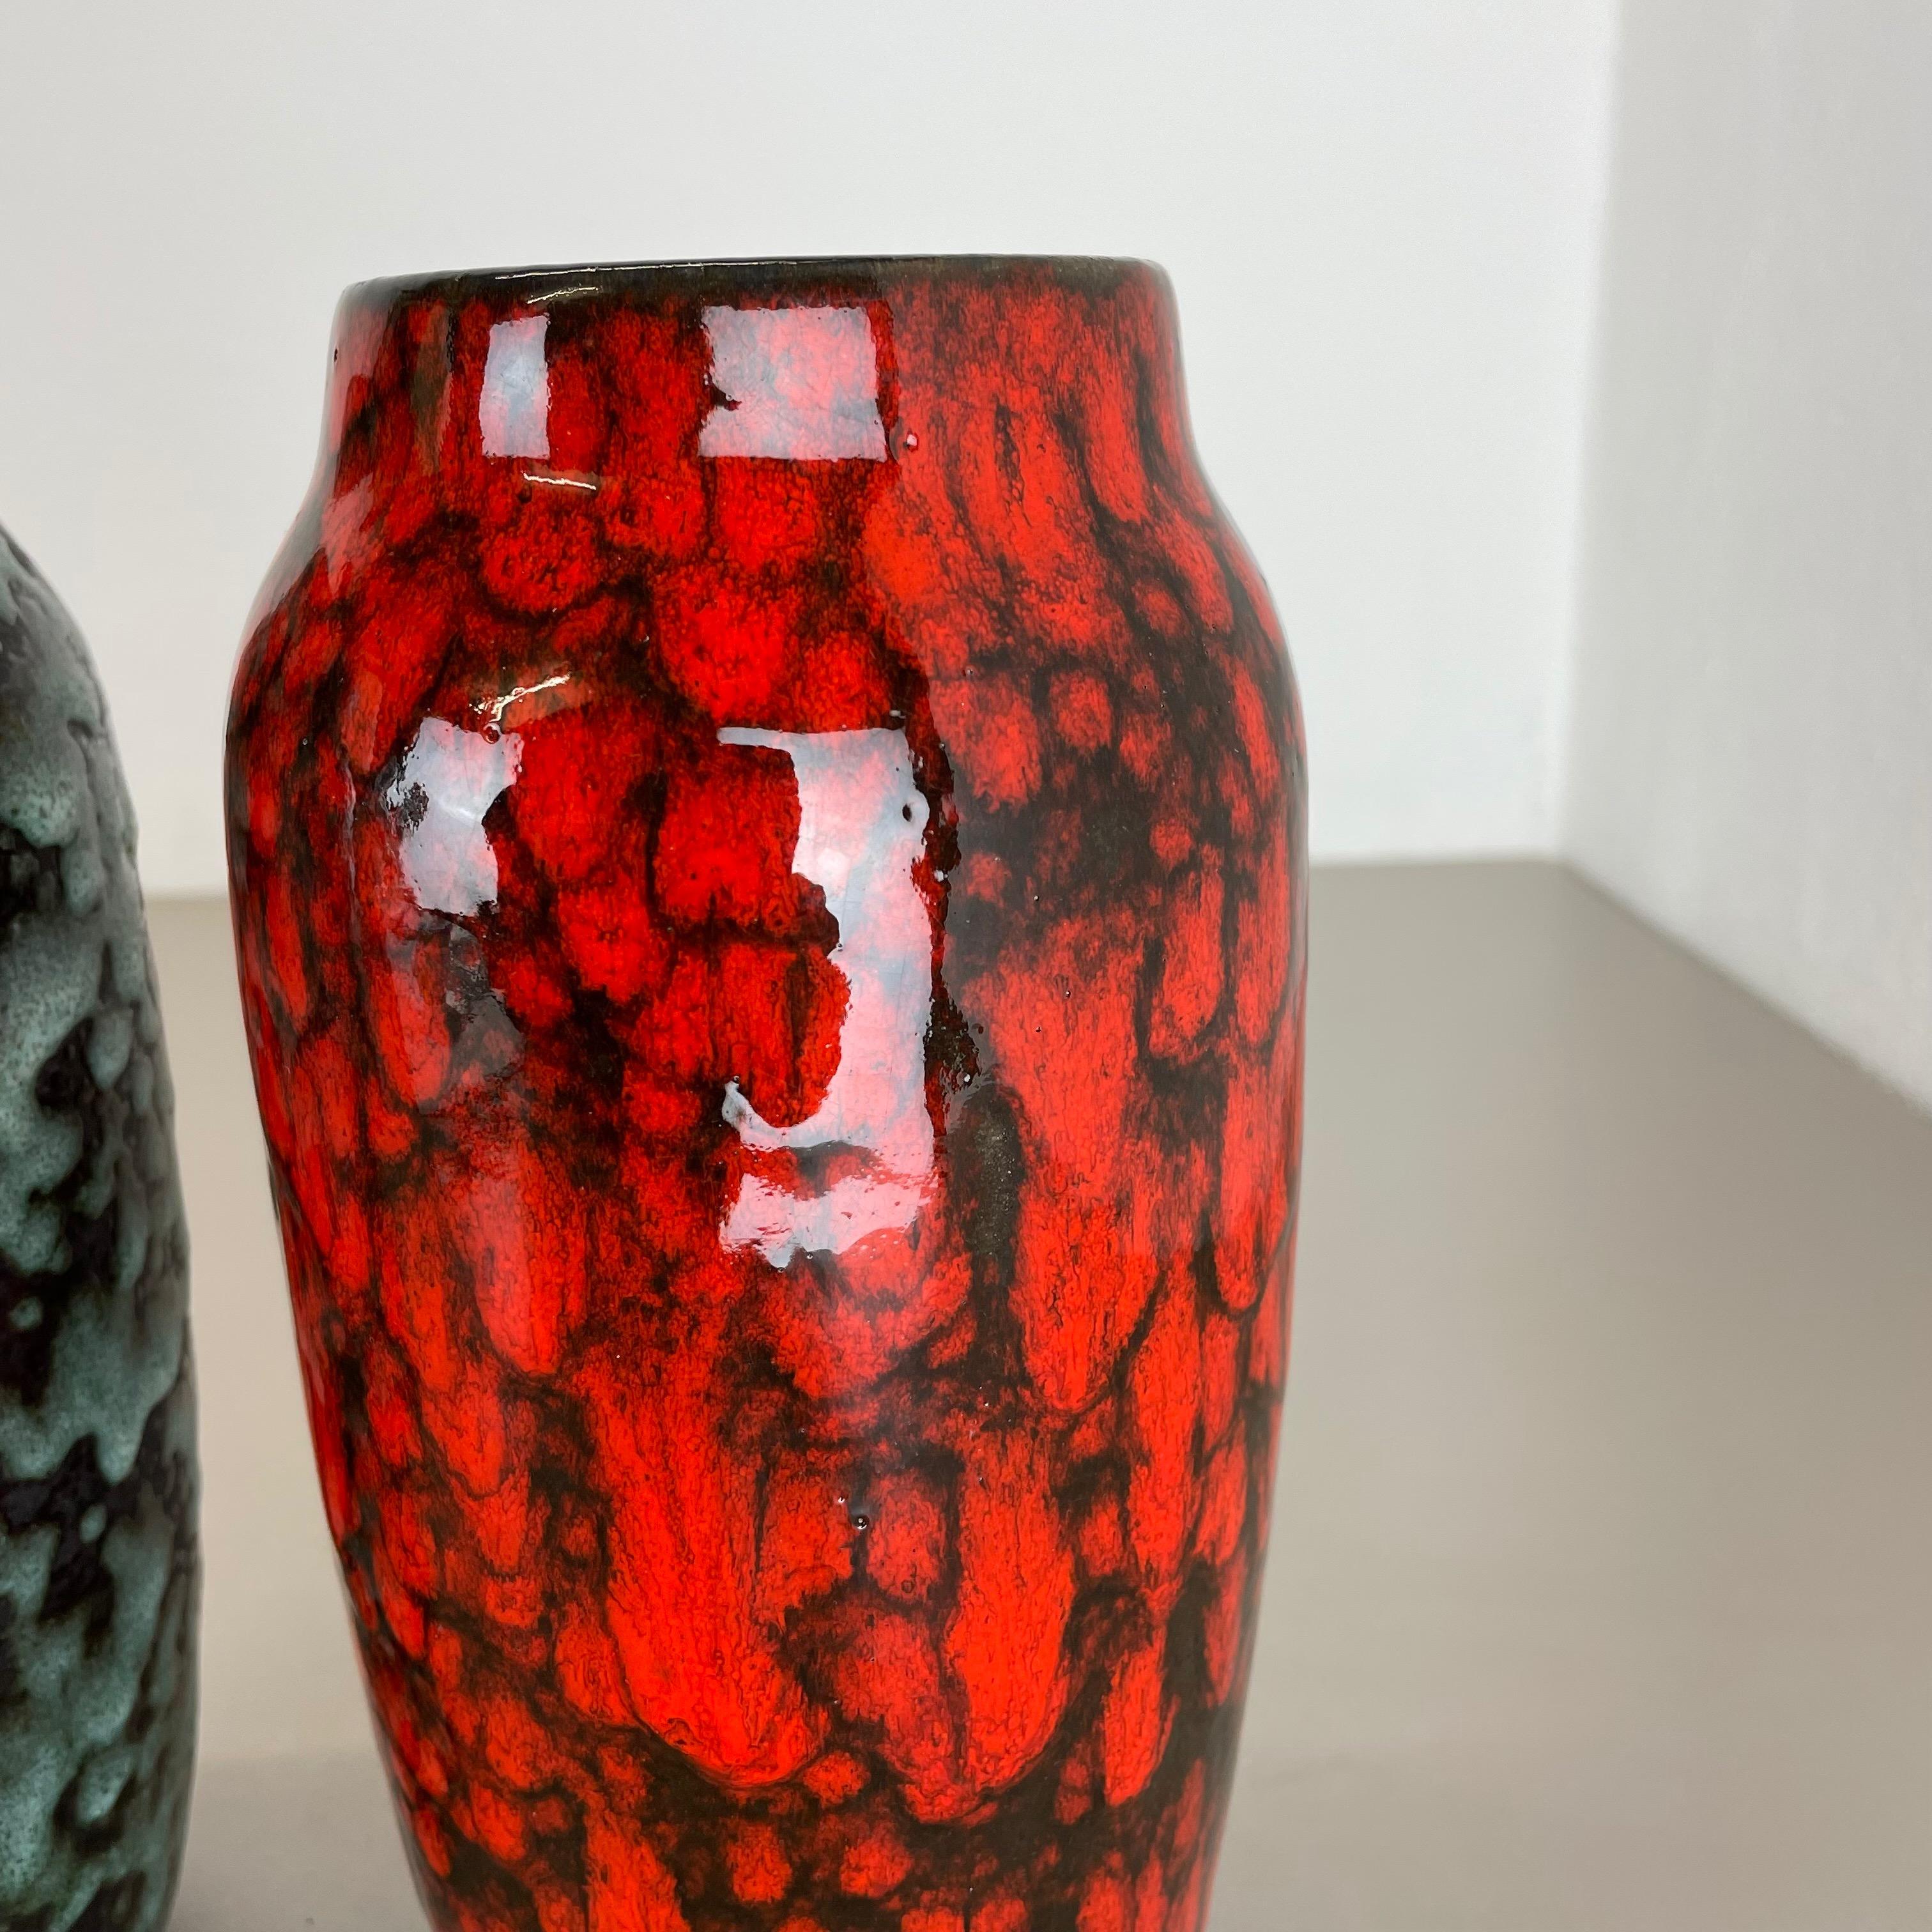 Set of 2 Rare Super Color Crusty Fat Lava Vases by Scheurich, Germany WGP, 1970s For Sale 6